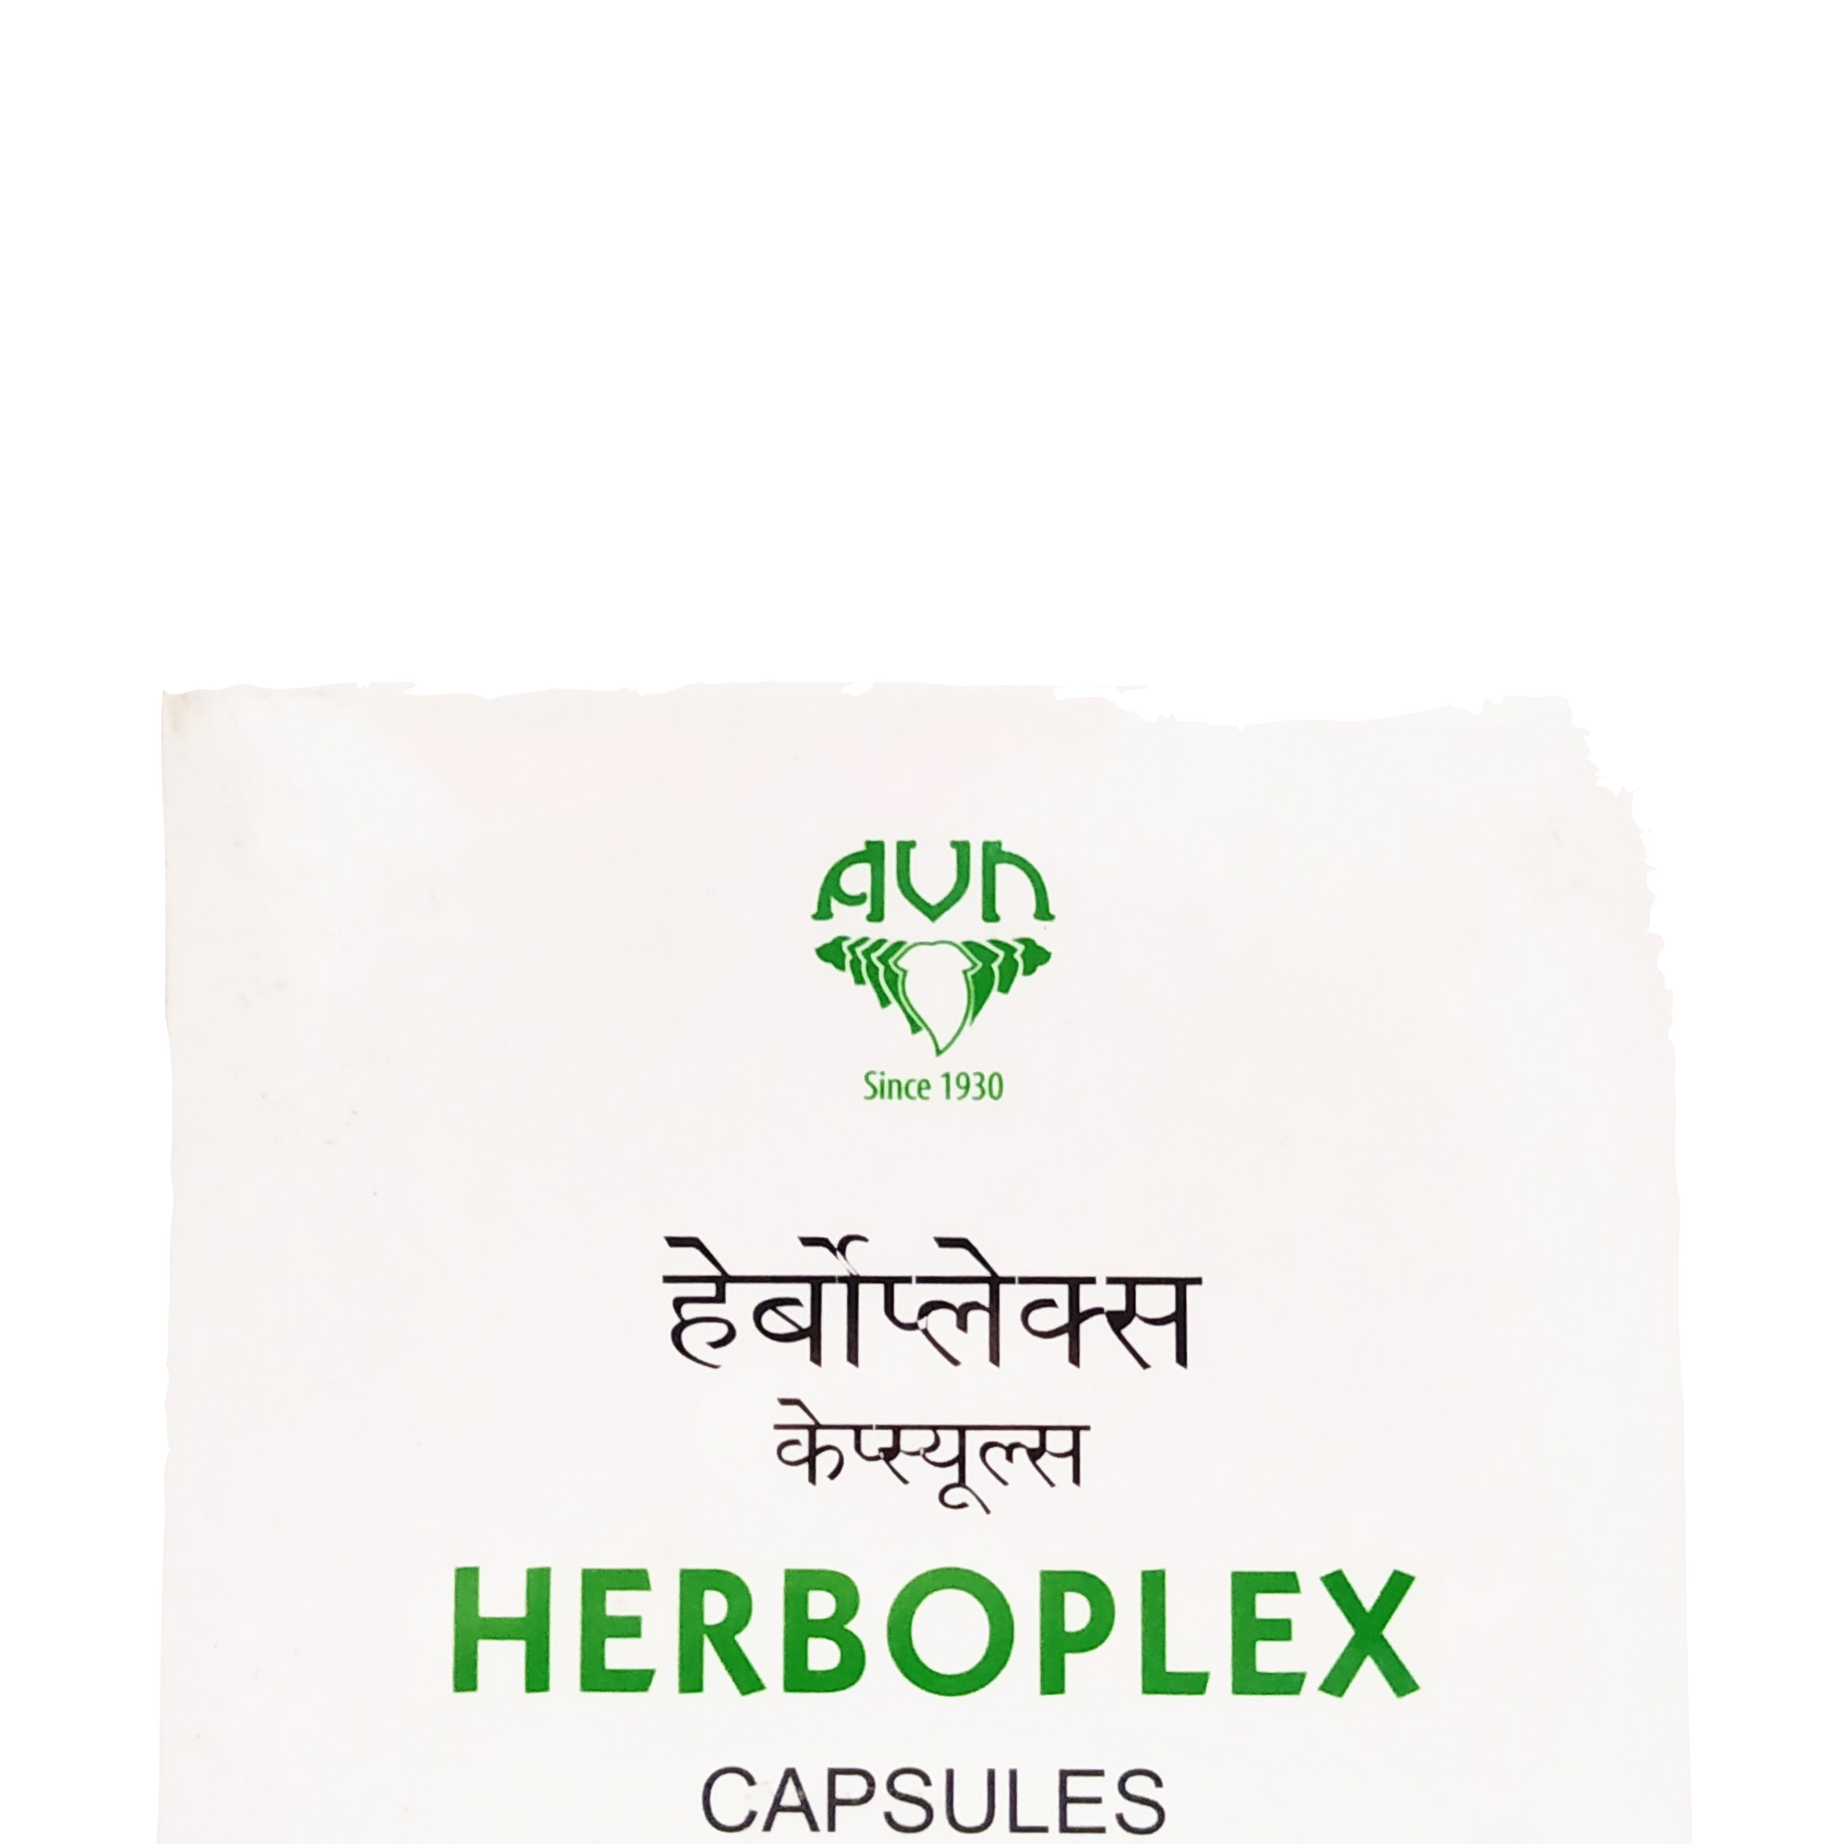 Shop Herboplex capsules - 10Capsules at price 35.00 from AVN Online - Ayush Care